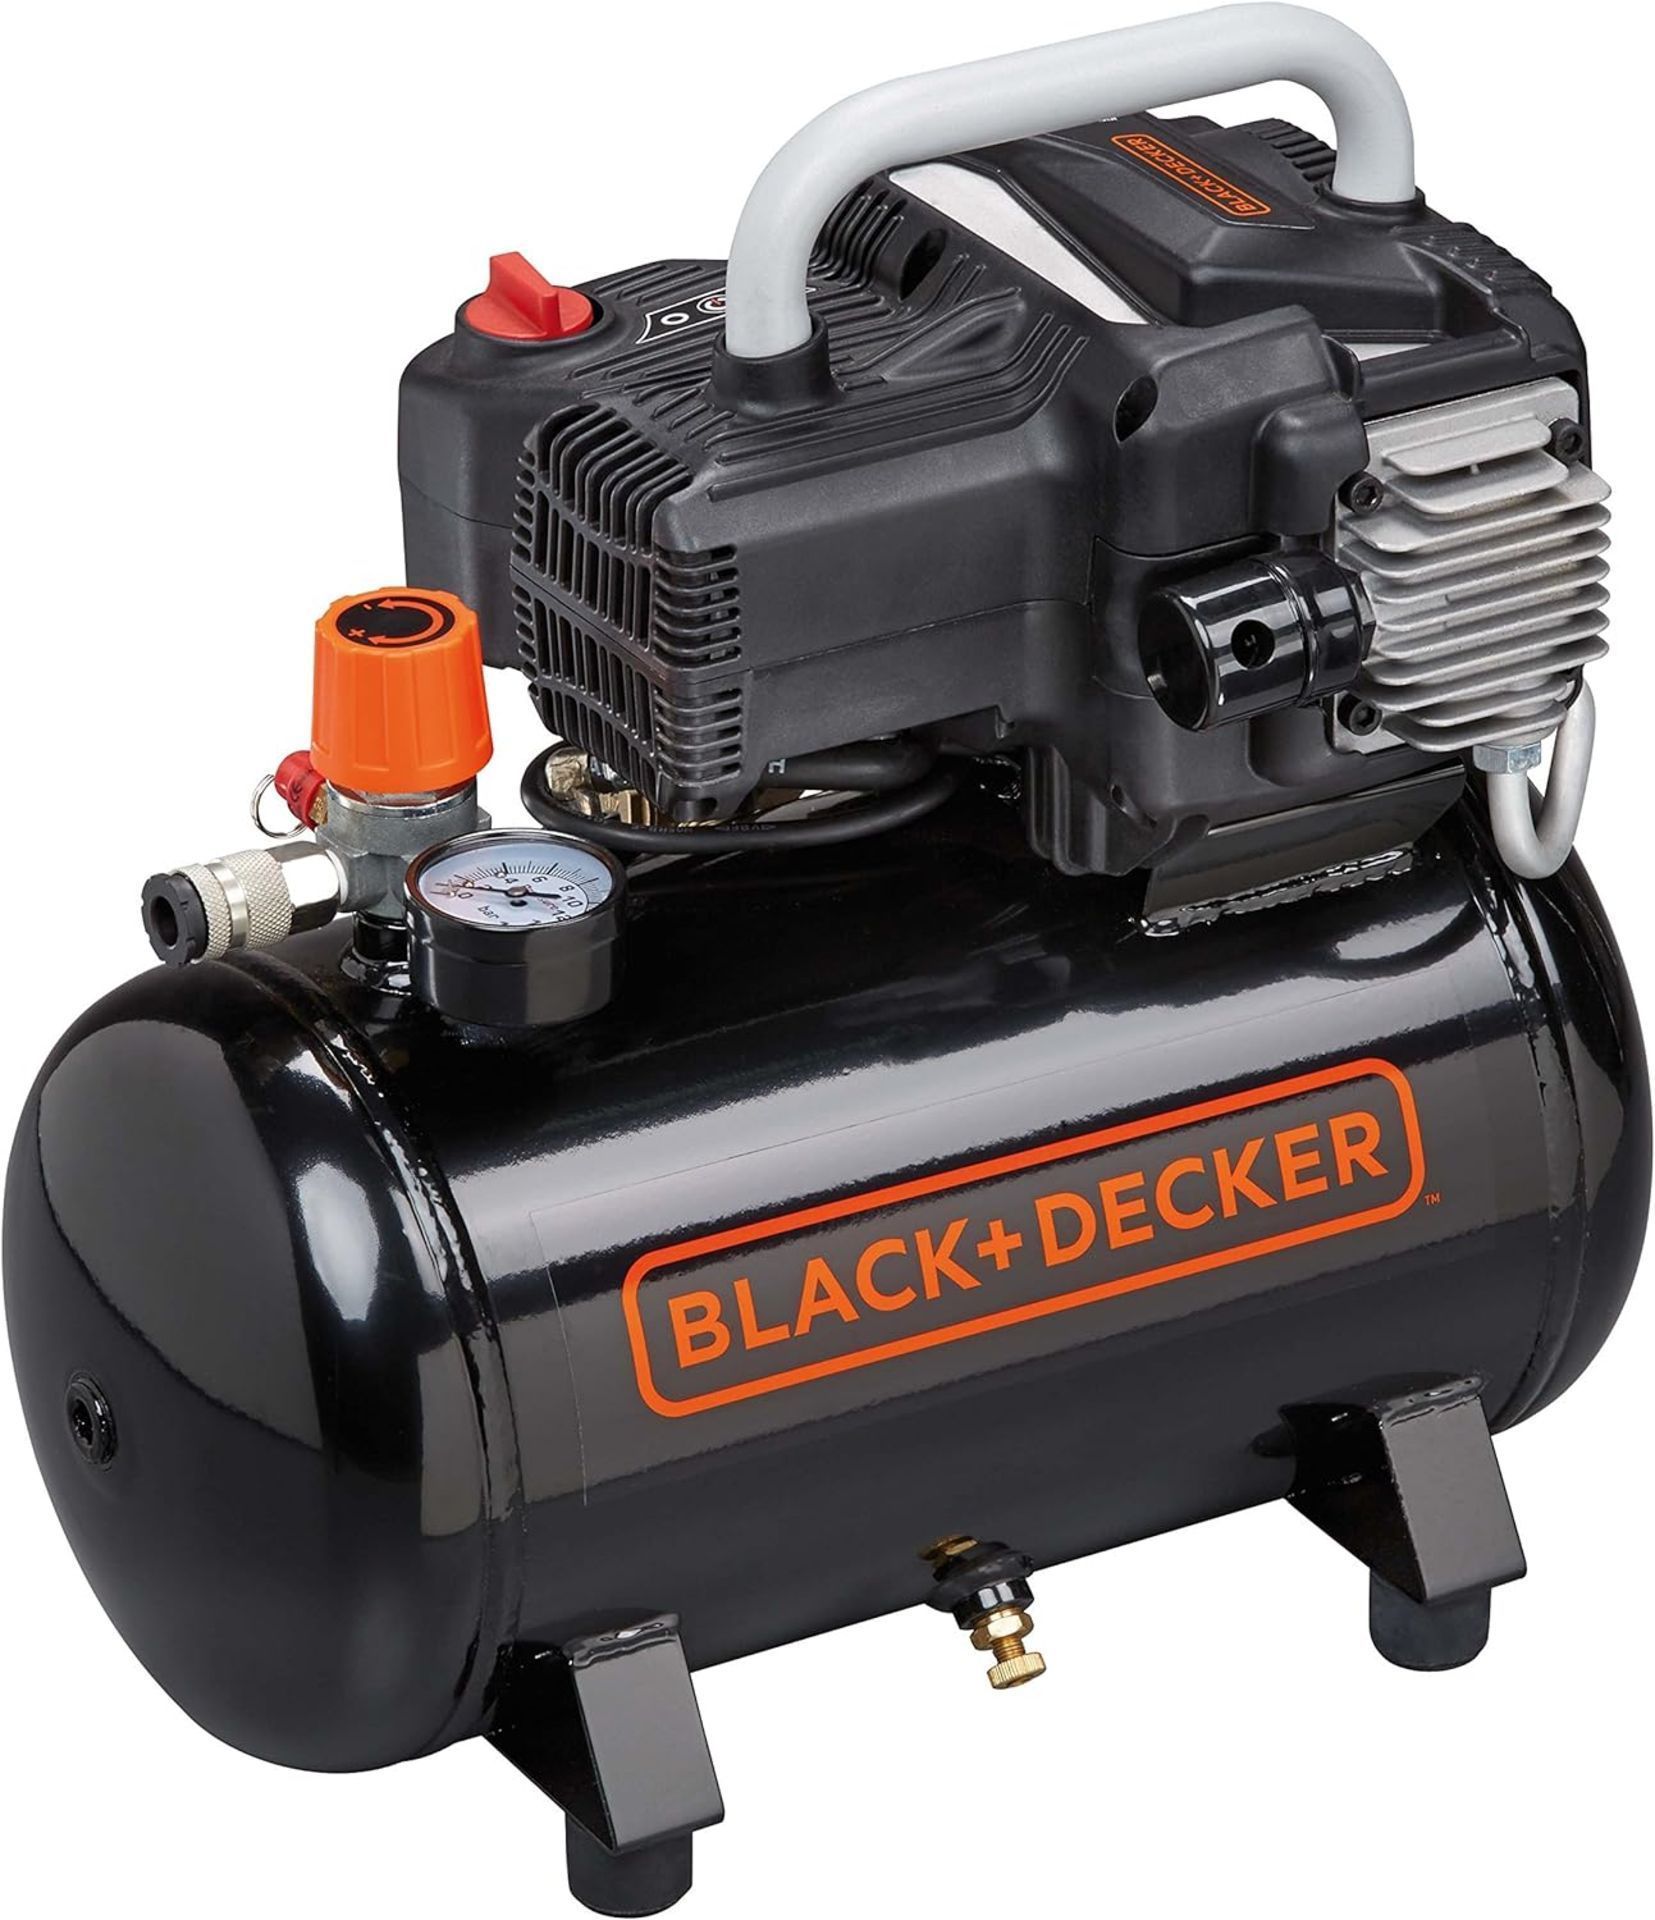 Trade Lot 5 X Brand New Black + Decker Compressor 195/12-NK, Thanks to a large tank capacity and a